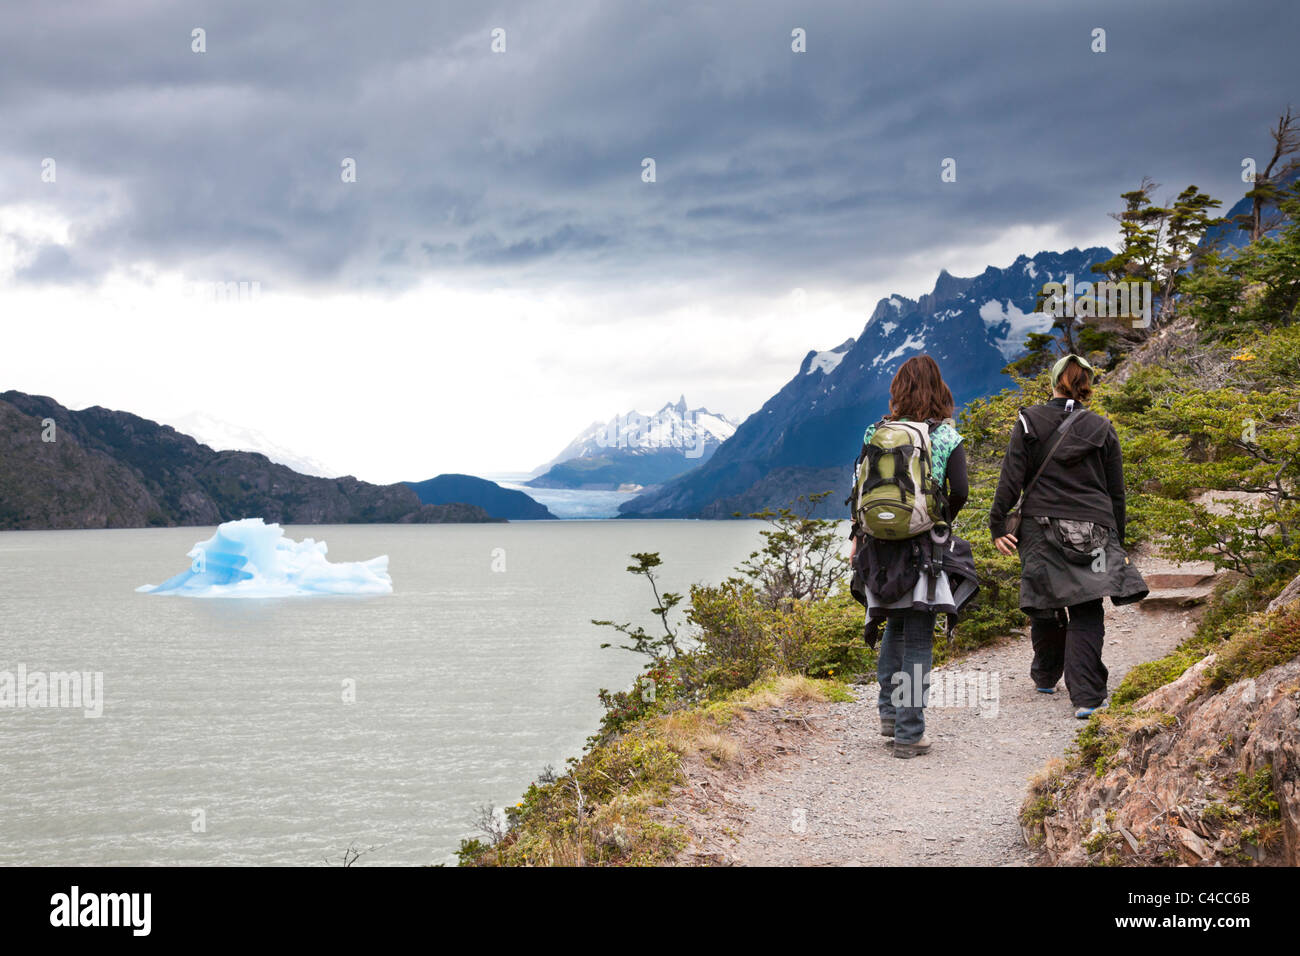 Glacier Grey and Lake Grey, Torres del Paine National Park, Chile Stock Photo